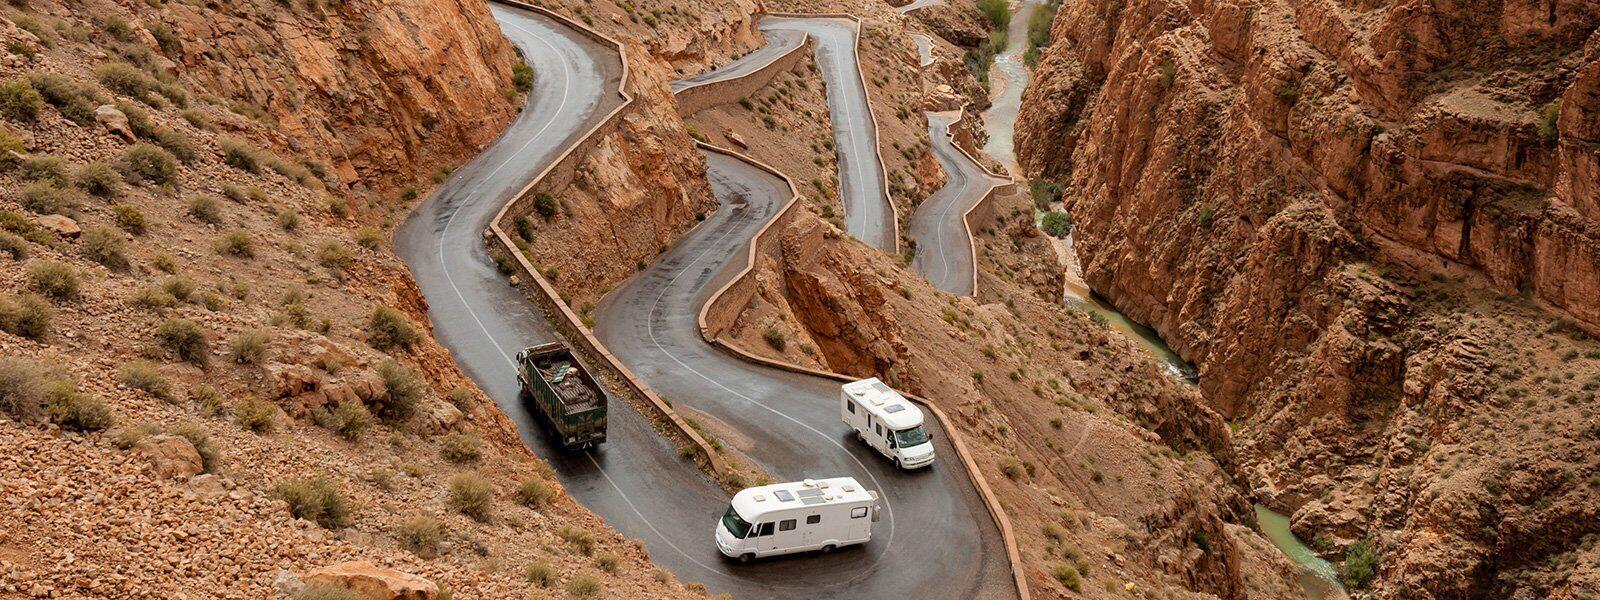 transports in morocco